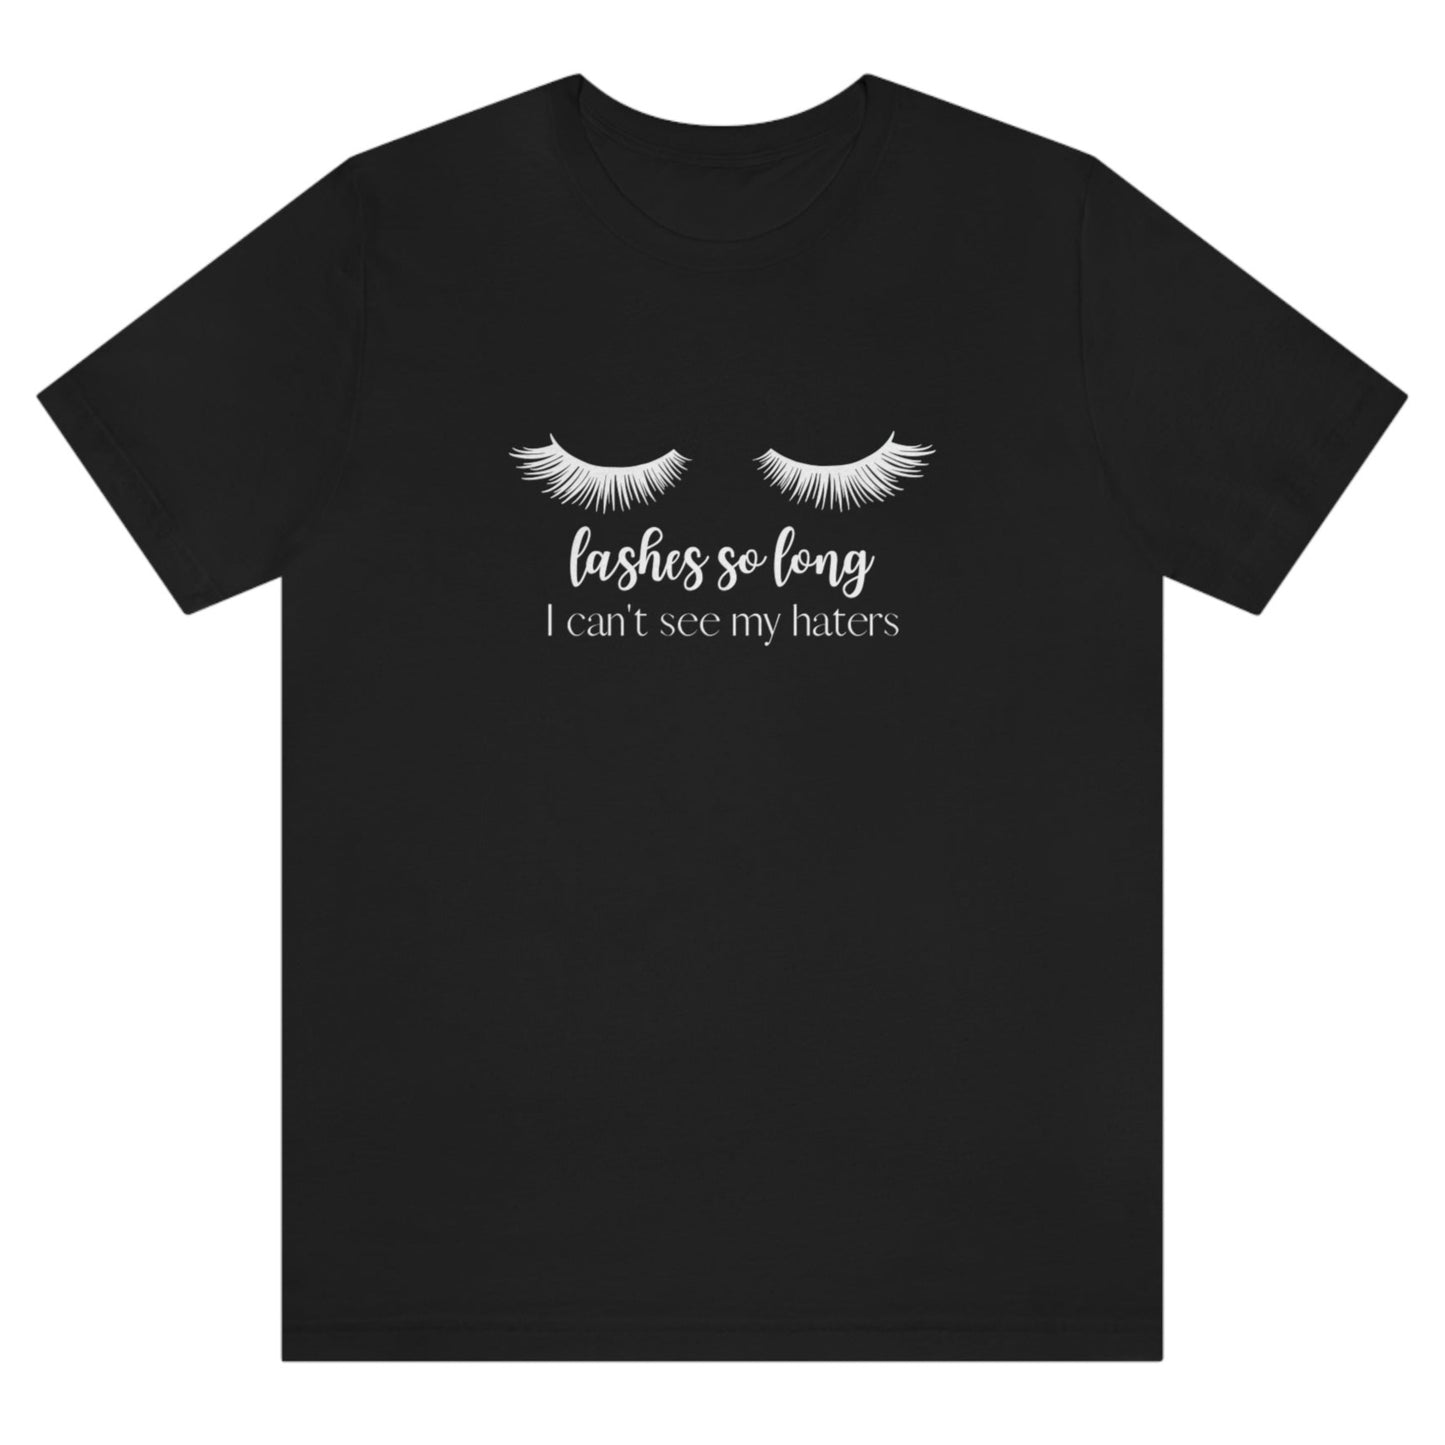 lashes-so-long-i-cant-see-my-haters-black-t-shirt-womens